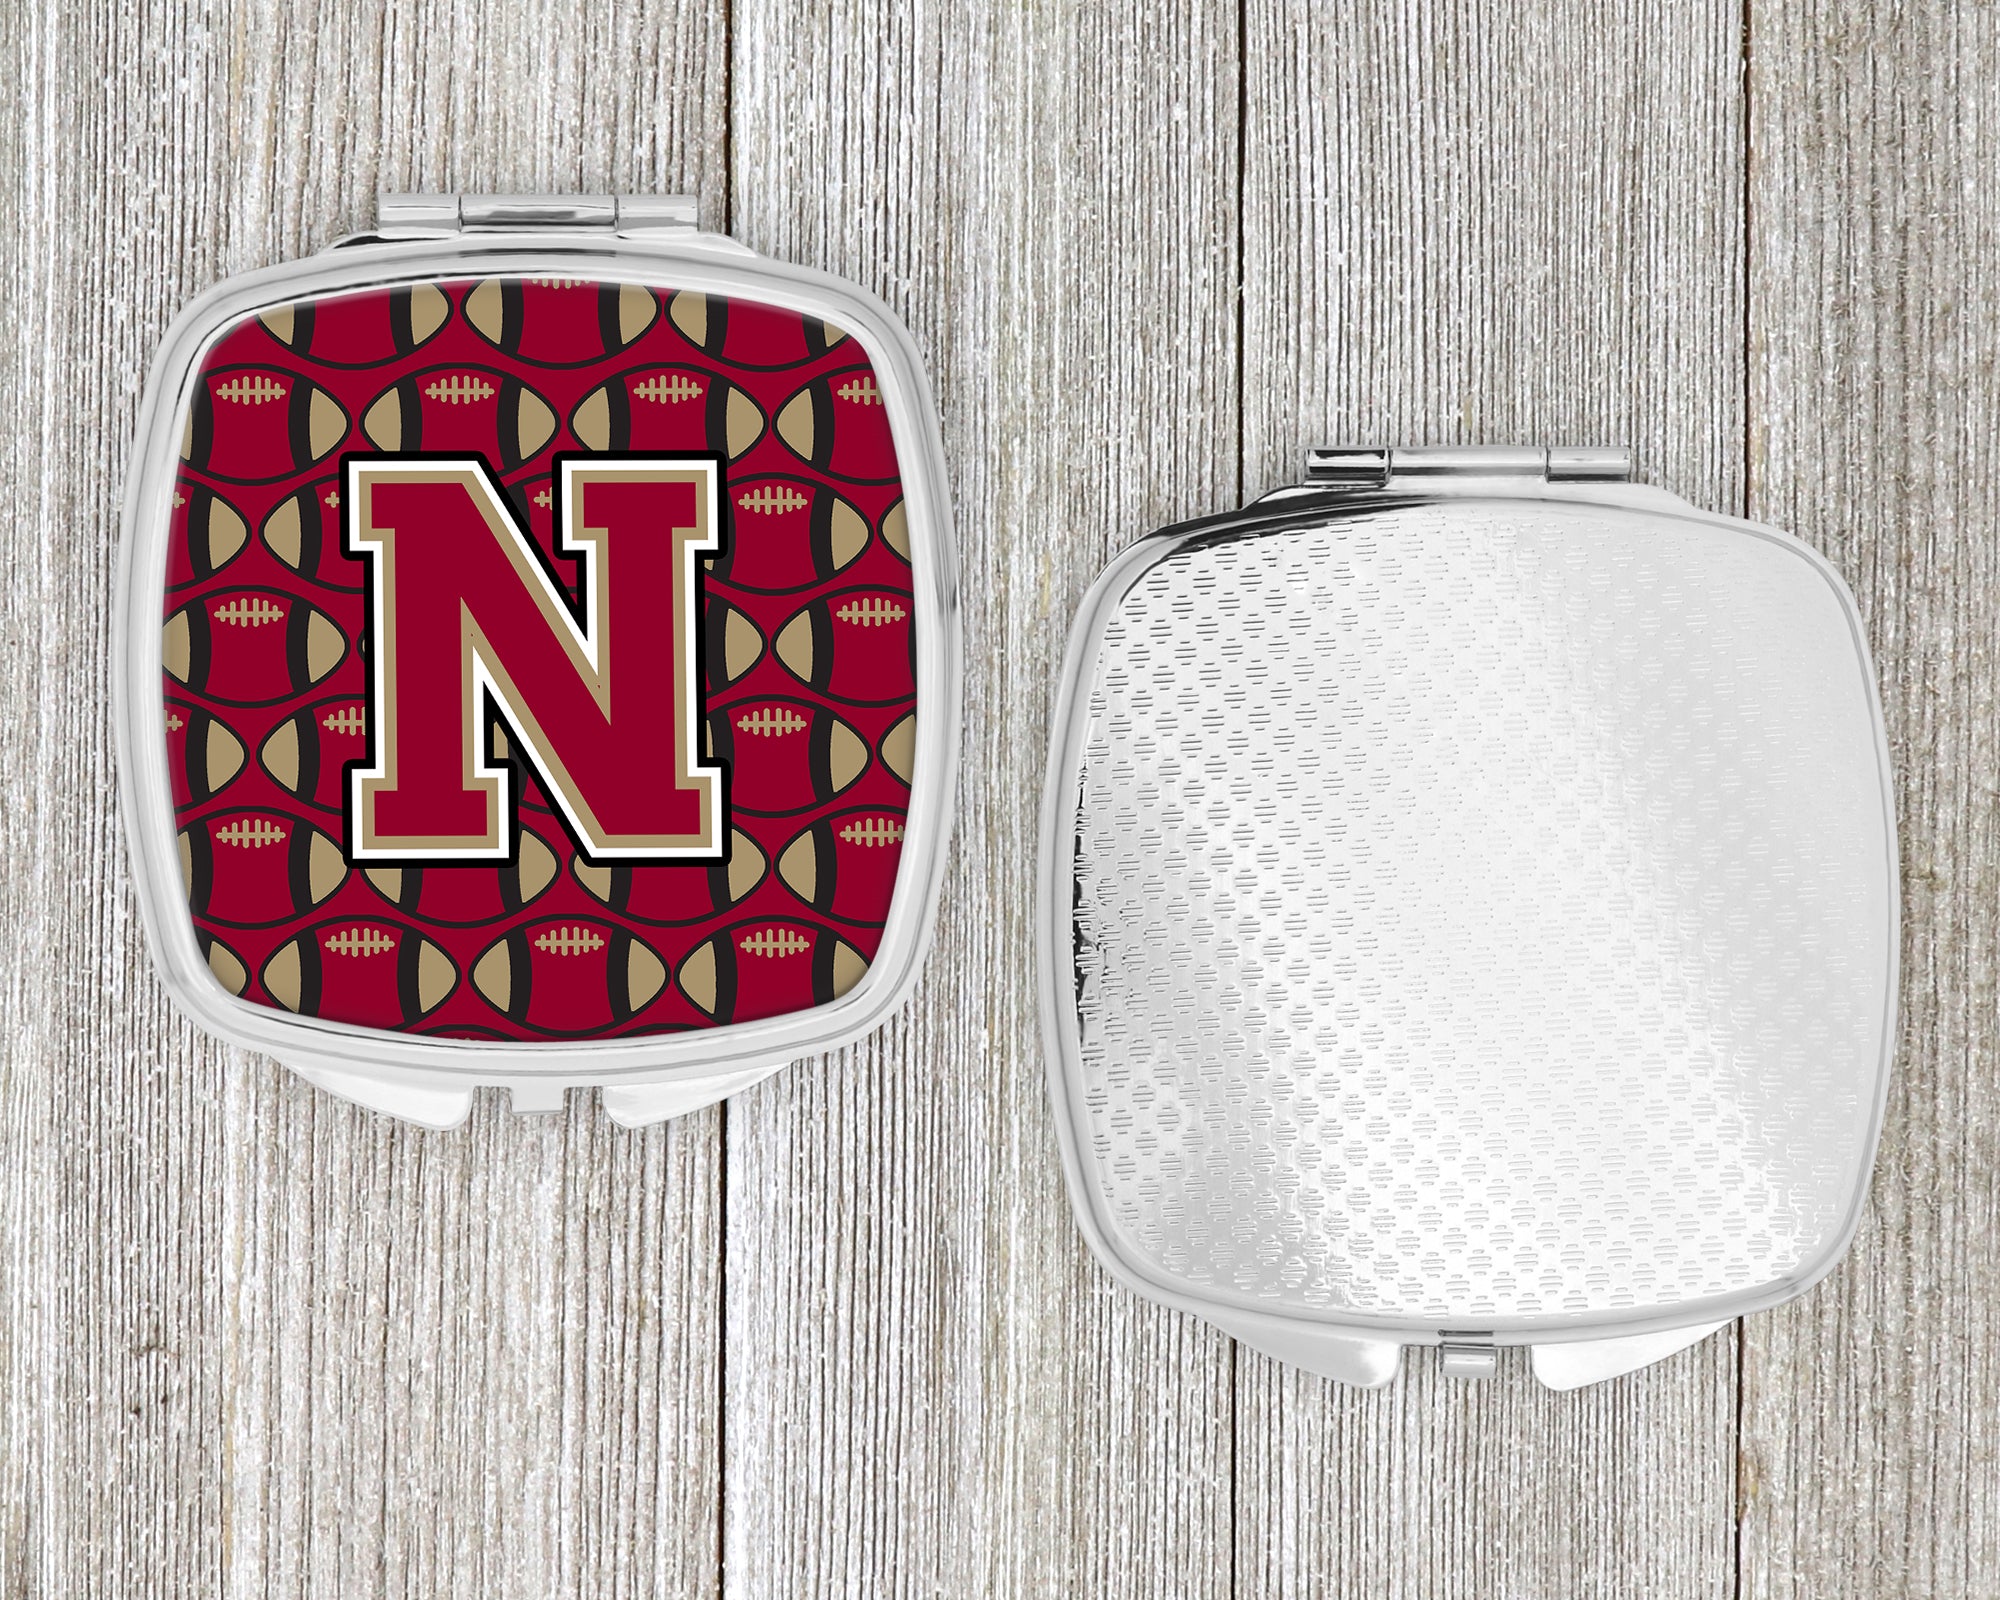 Letter N Football Garnet and Gold Compact Mirror CJ1078-NSCM